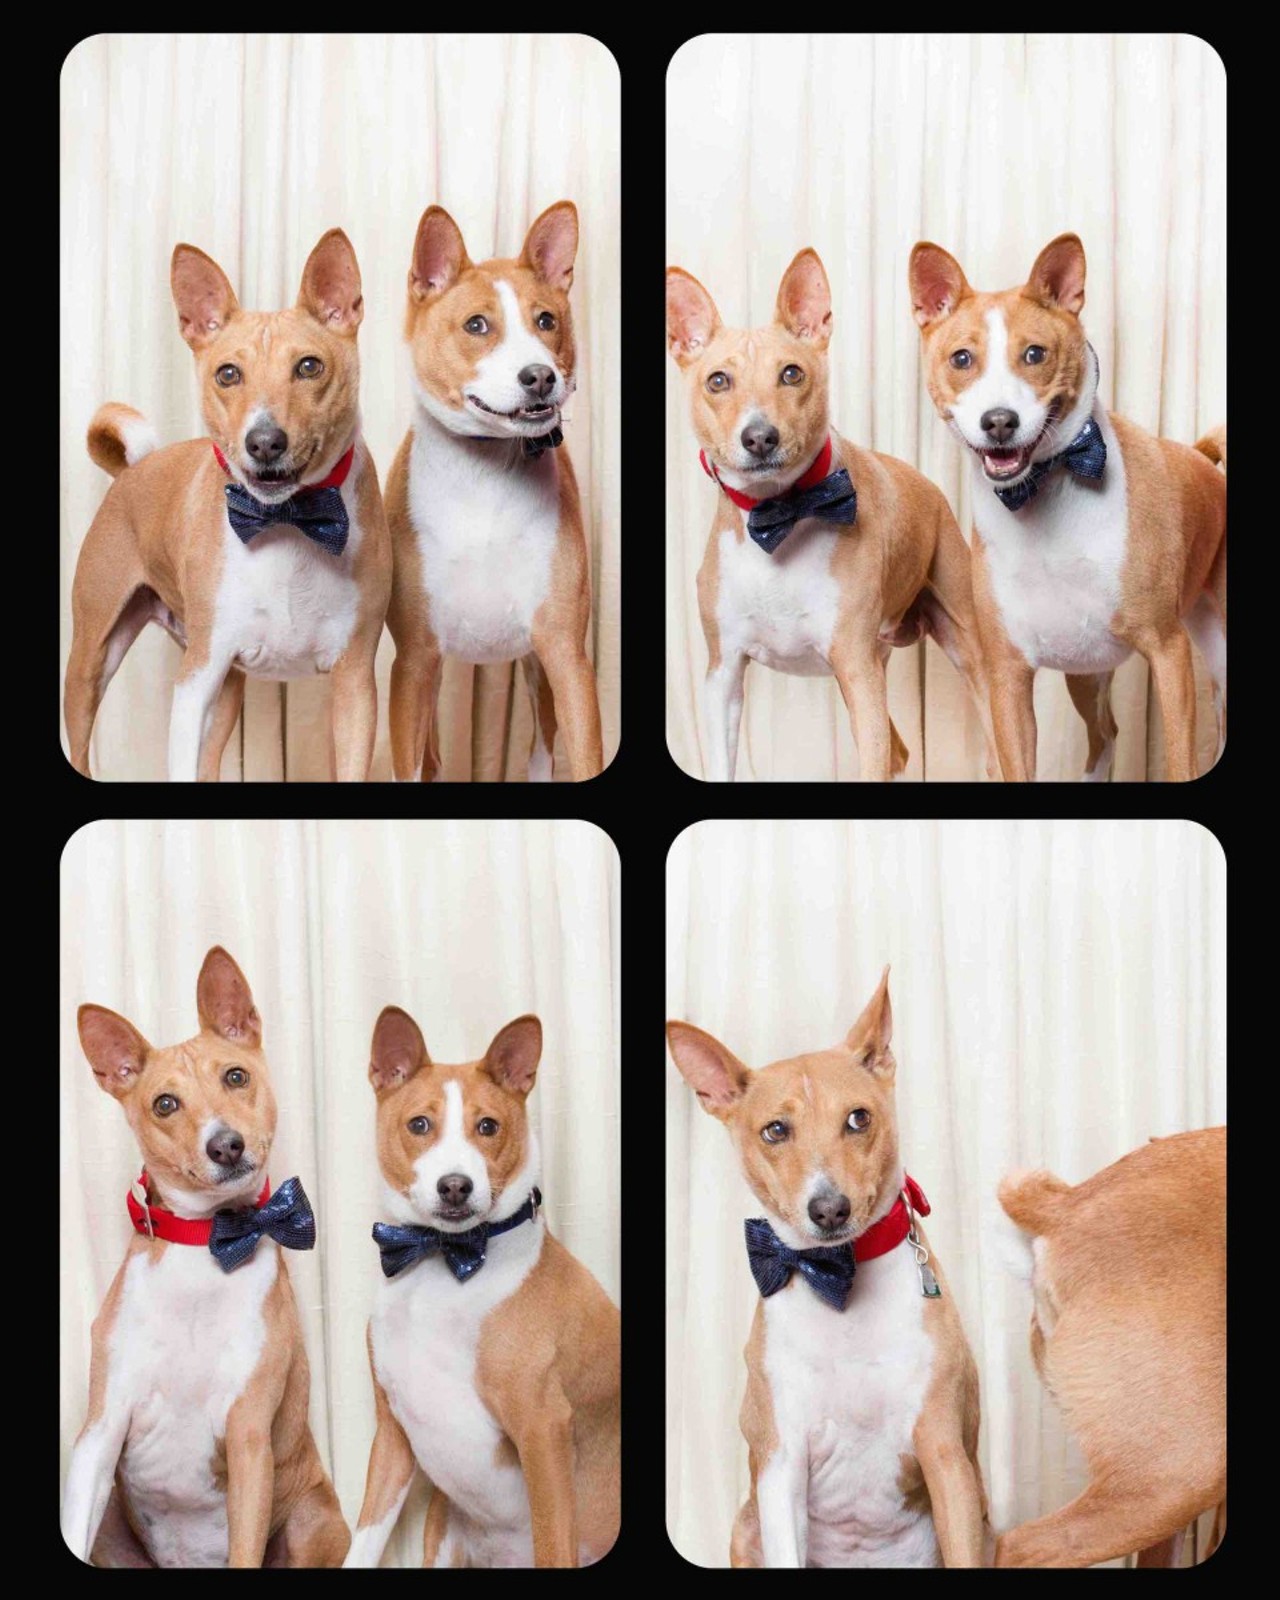 These dapper basenjis are ridiculous. 